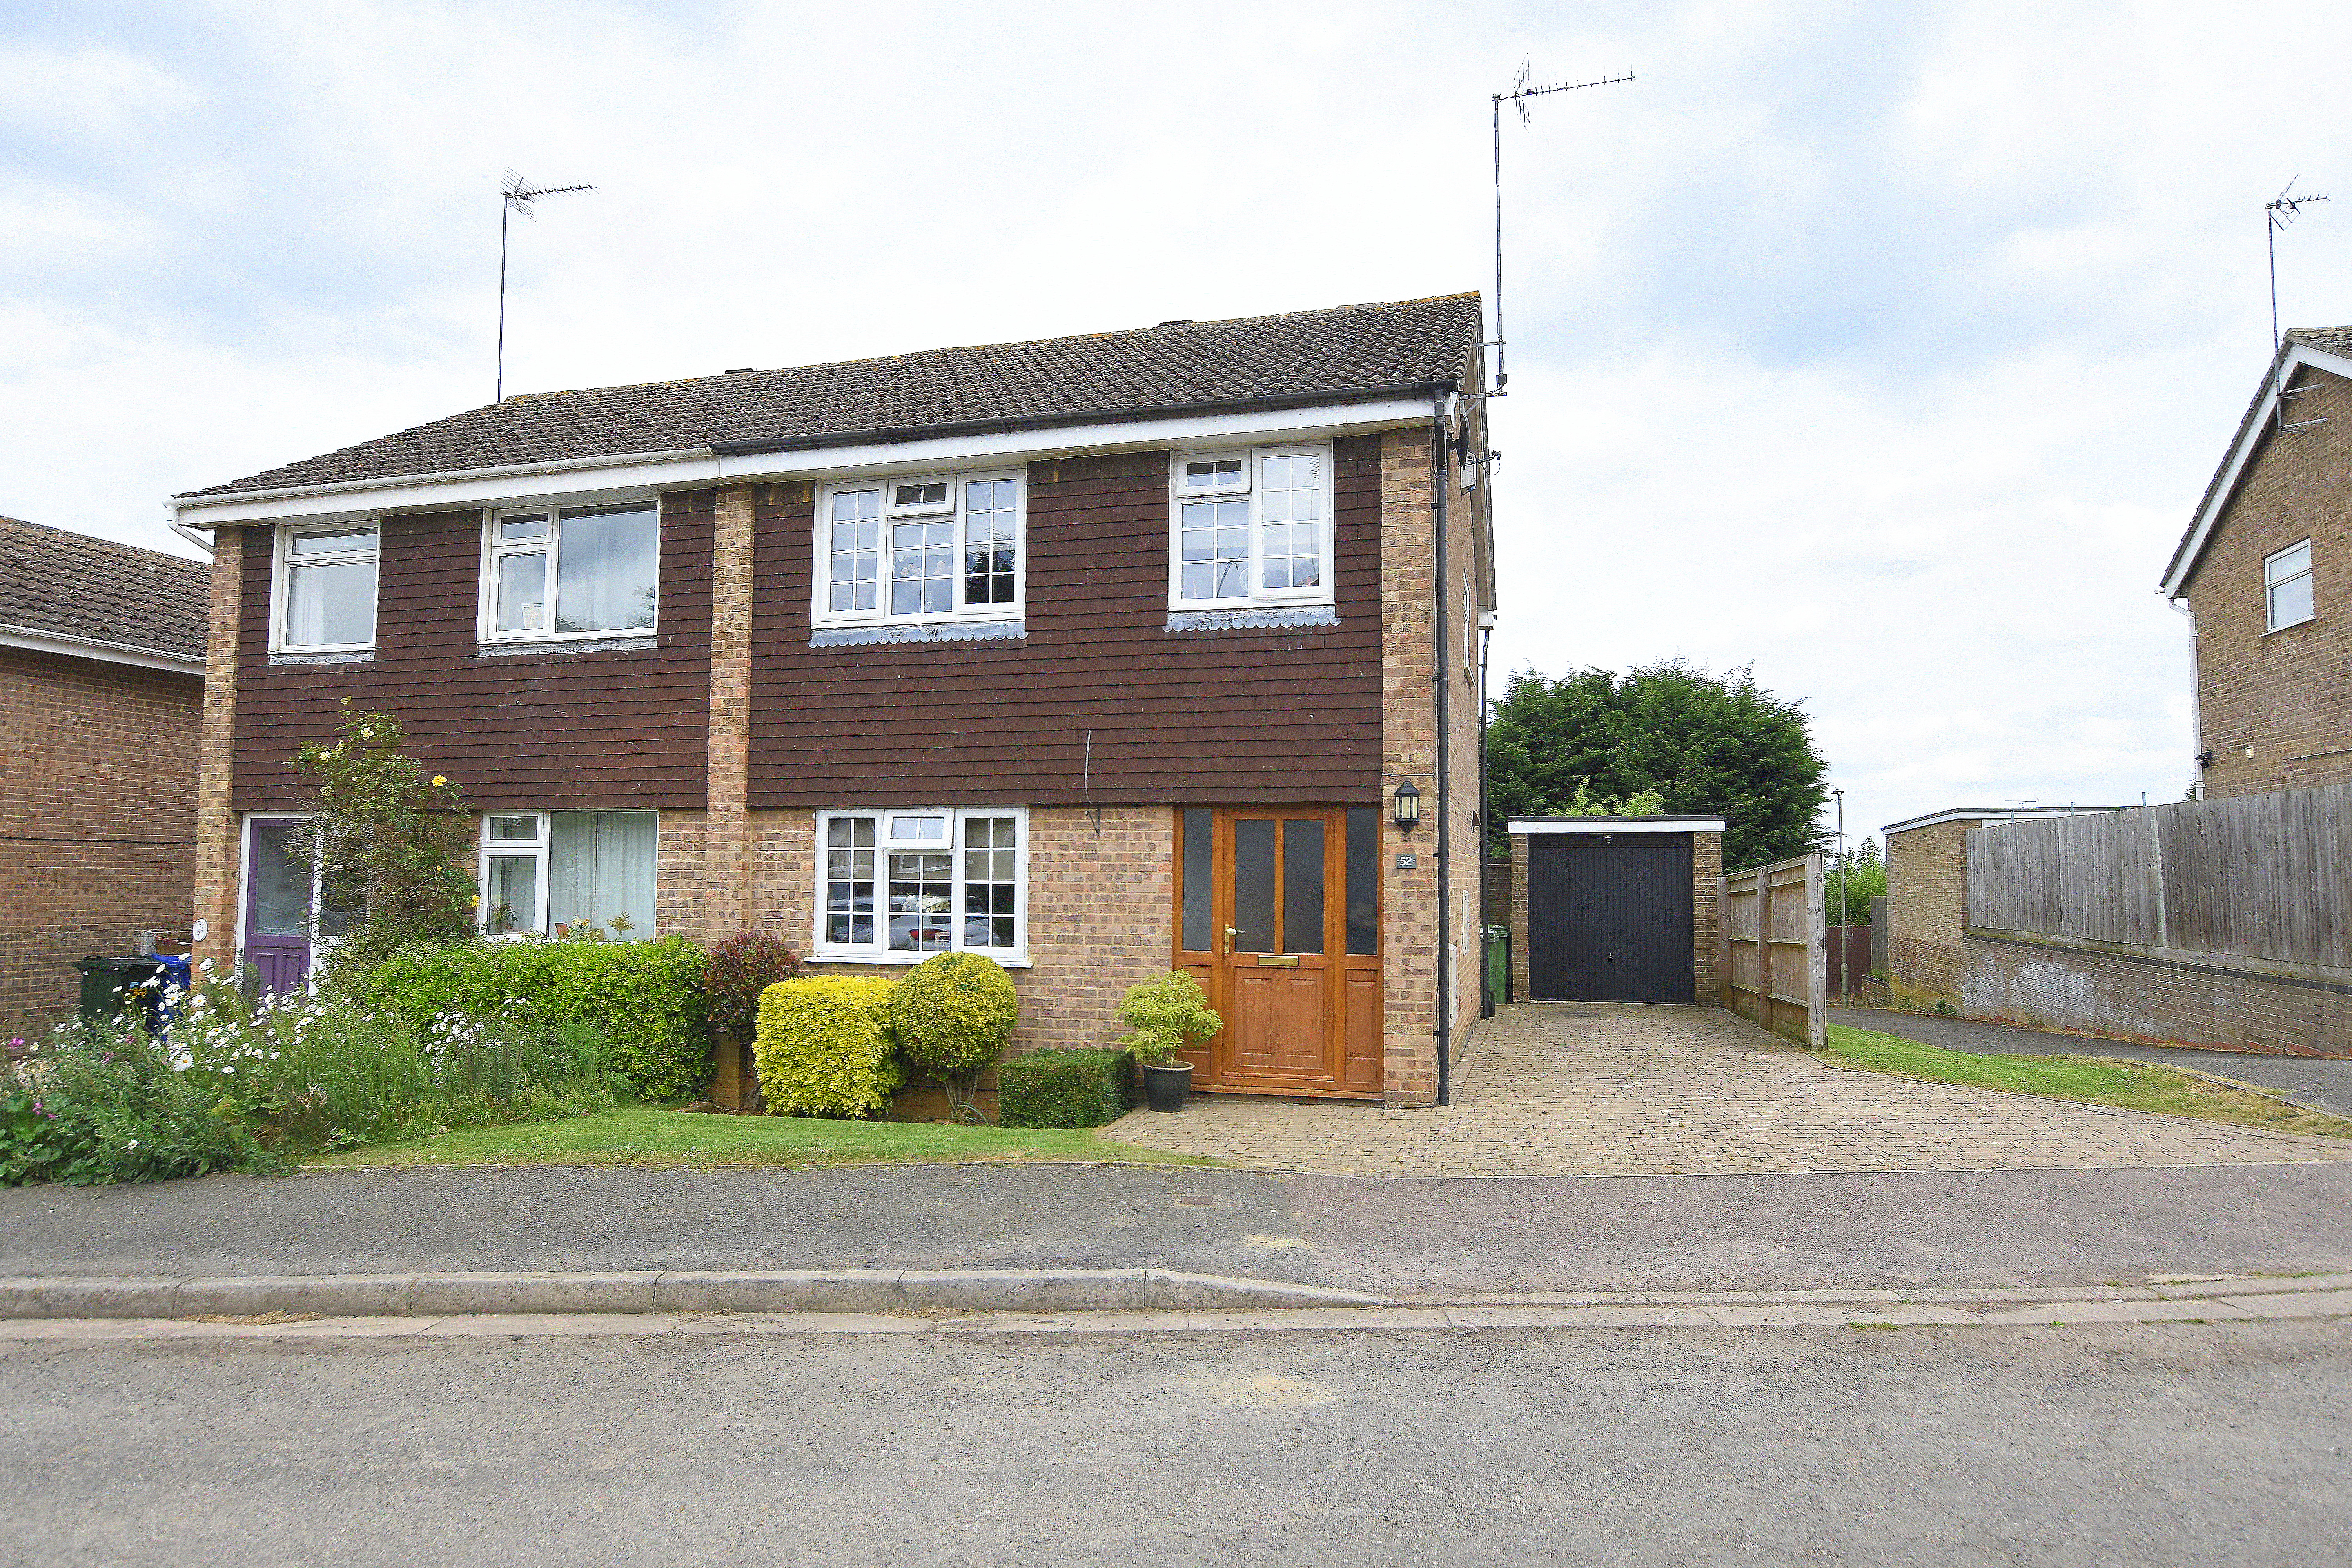 3 bed  for sale in Whimbrel Way, Banbury 0